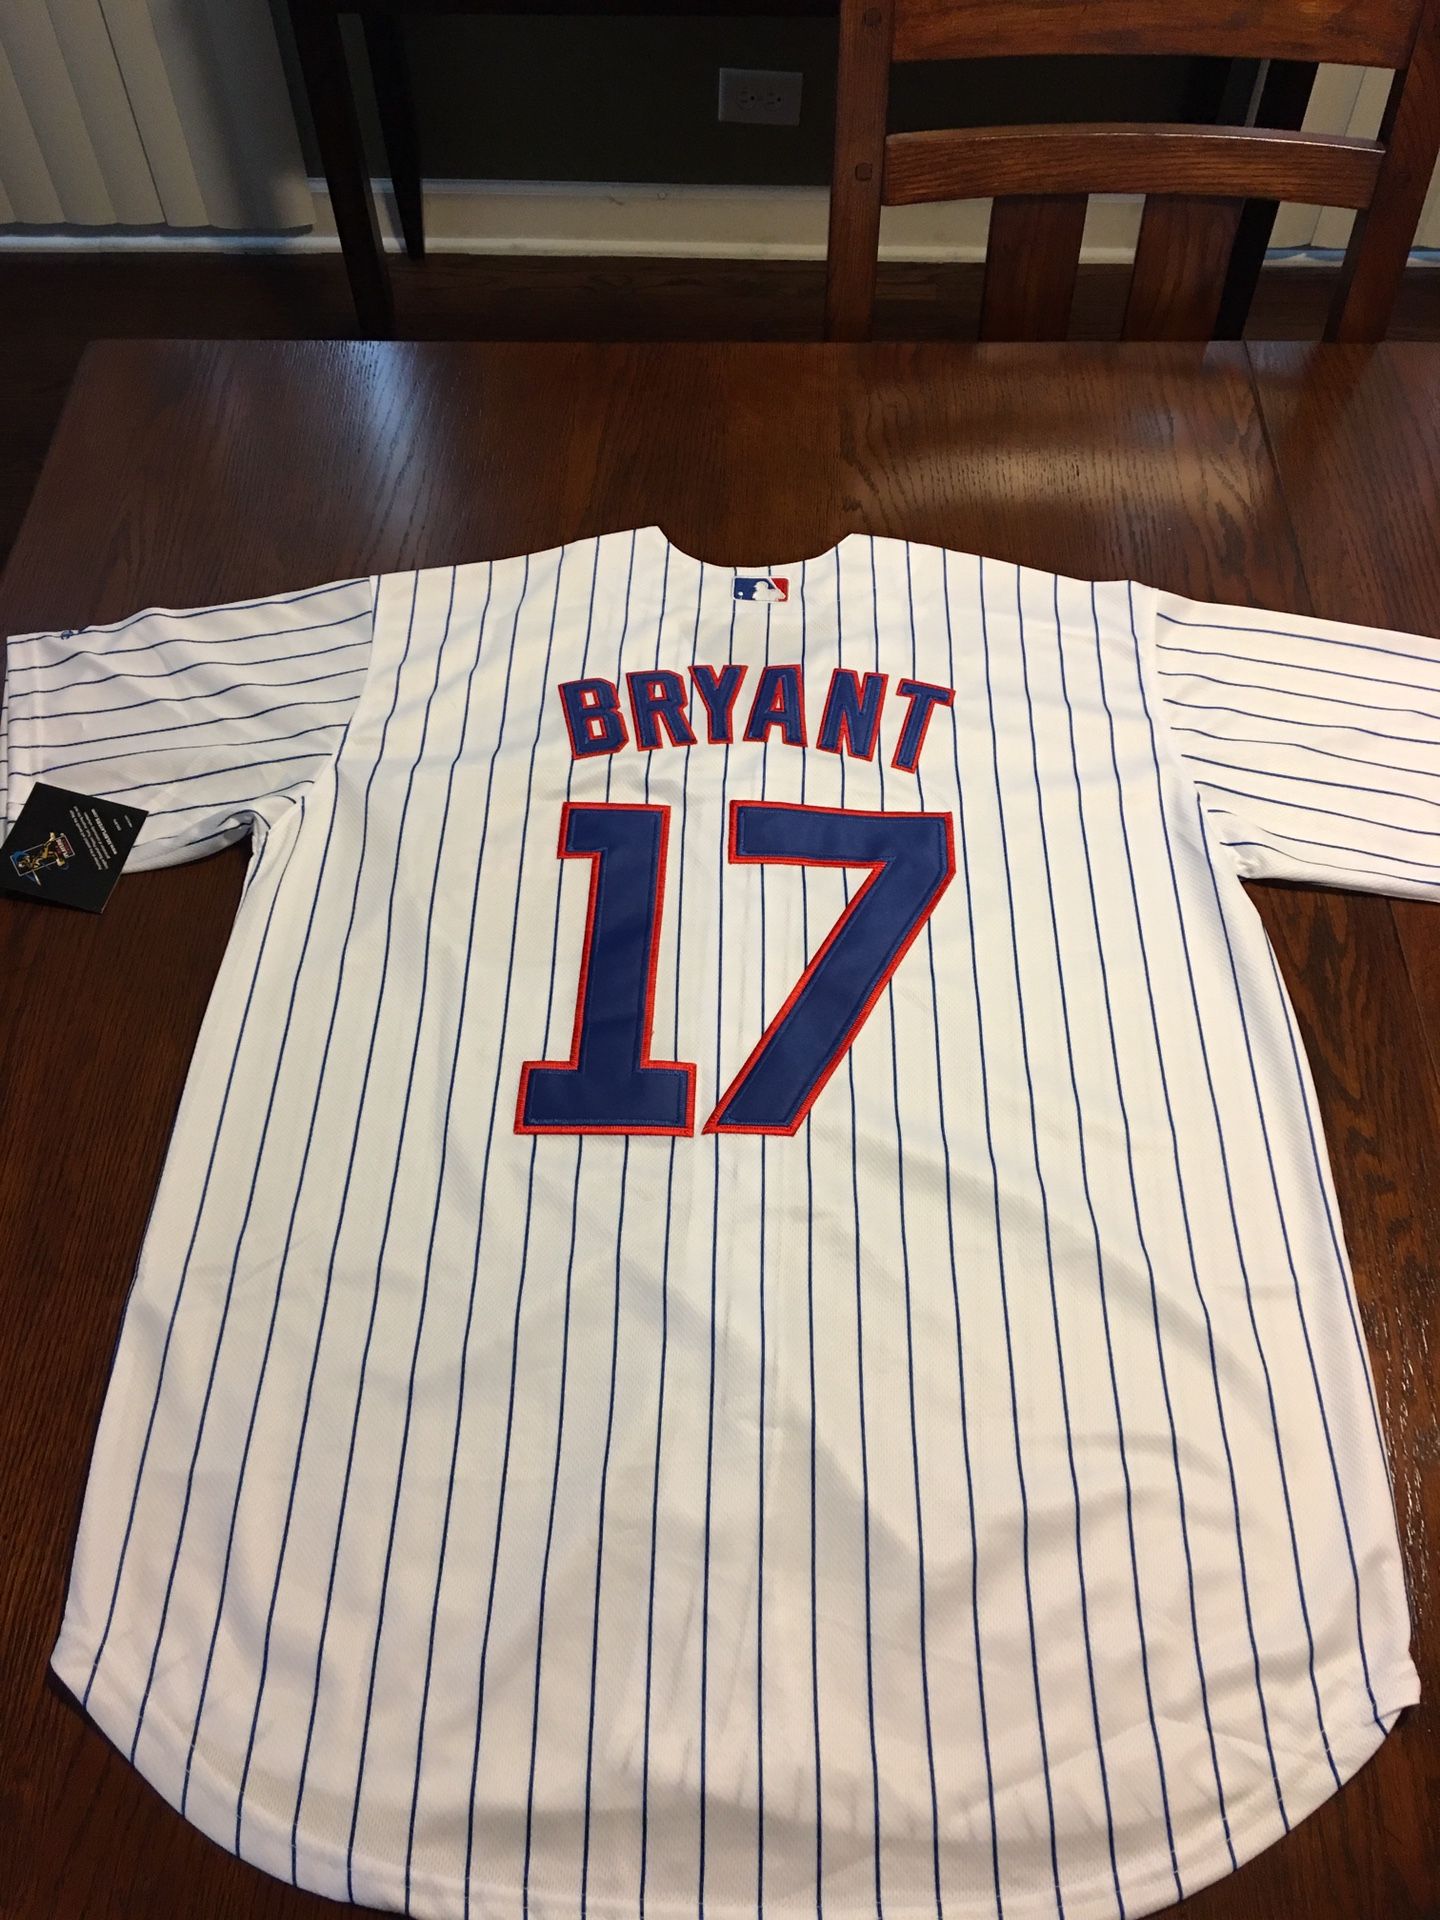 Bryant Cubs baseball jersey brand new large $35